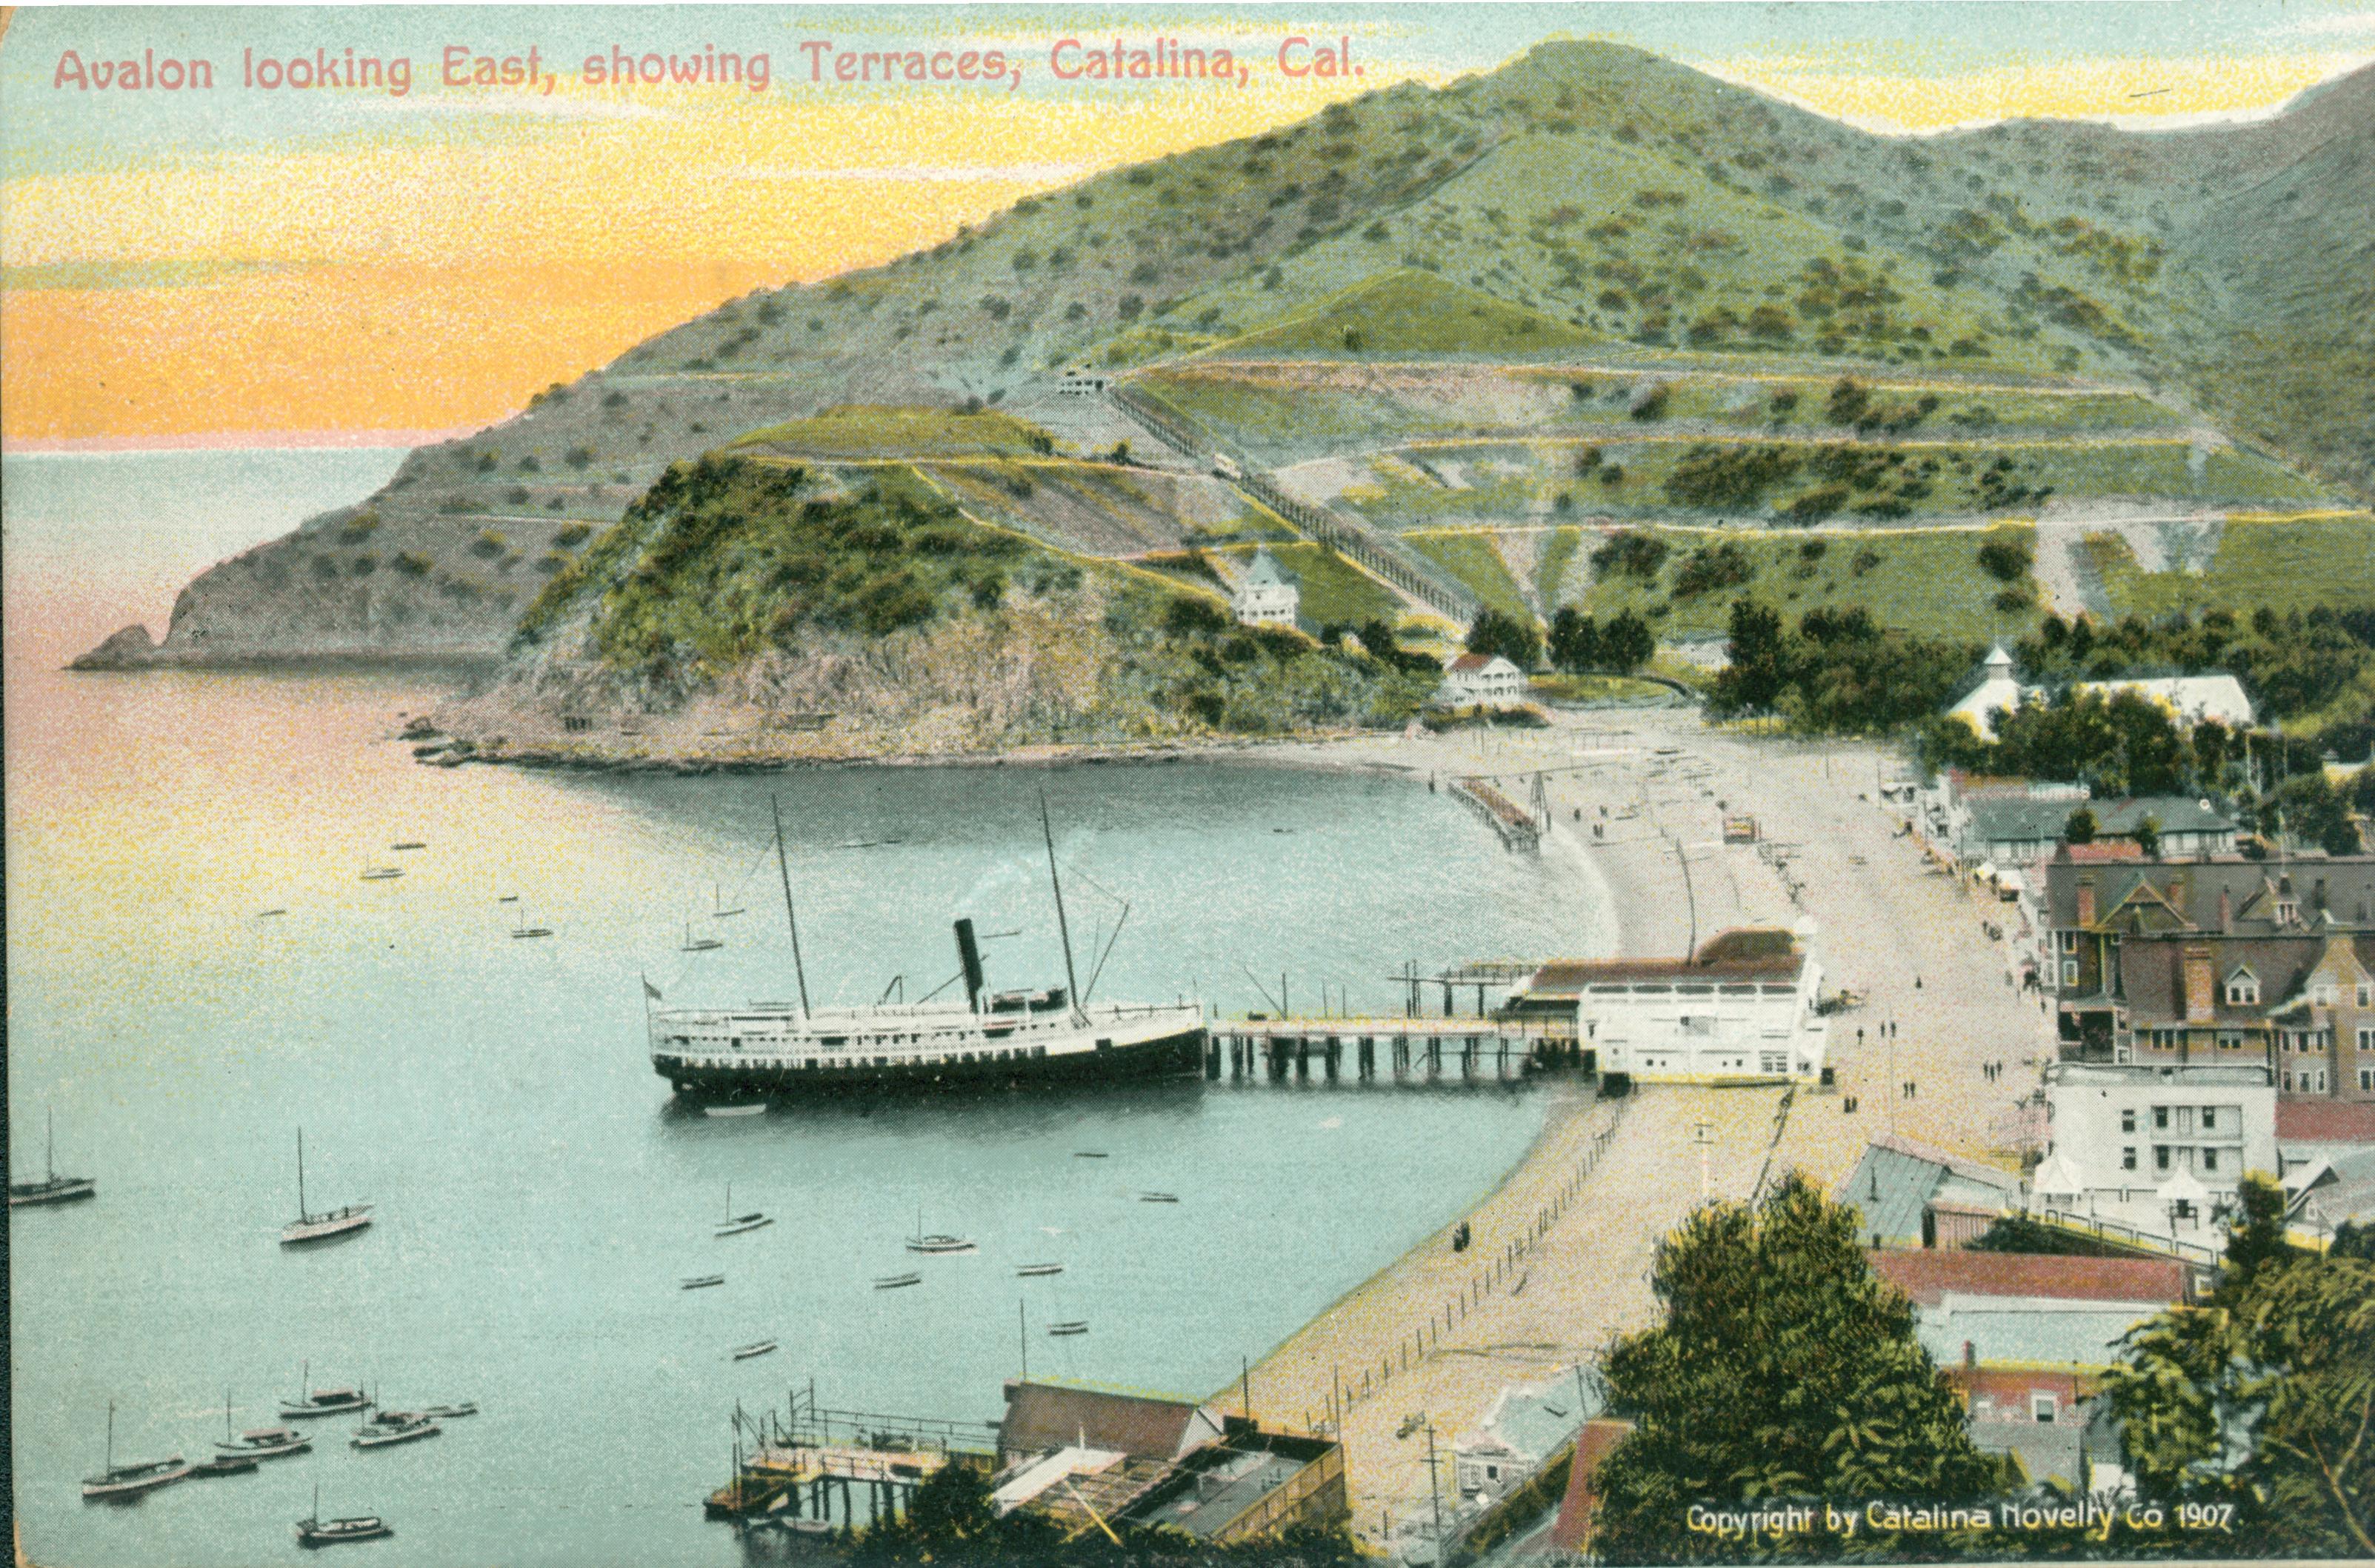 This postcard shows a bird's eye view of the harbor on Catalina Island